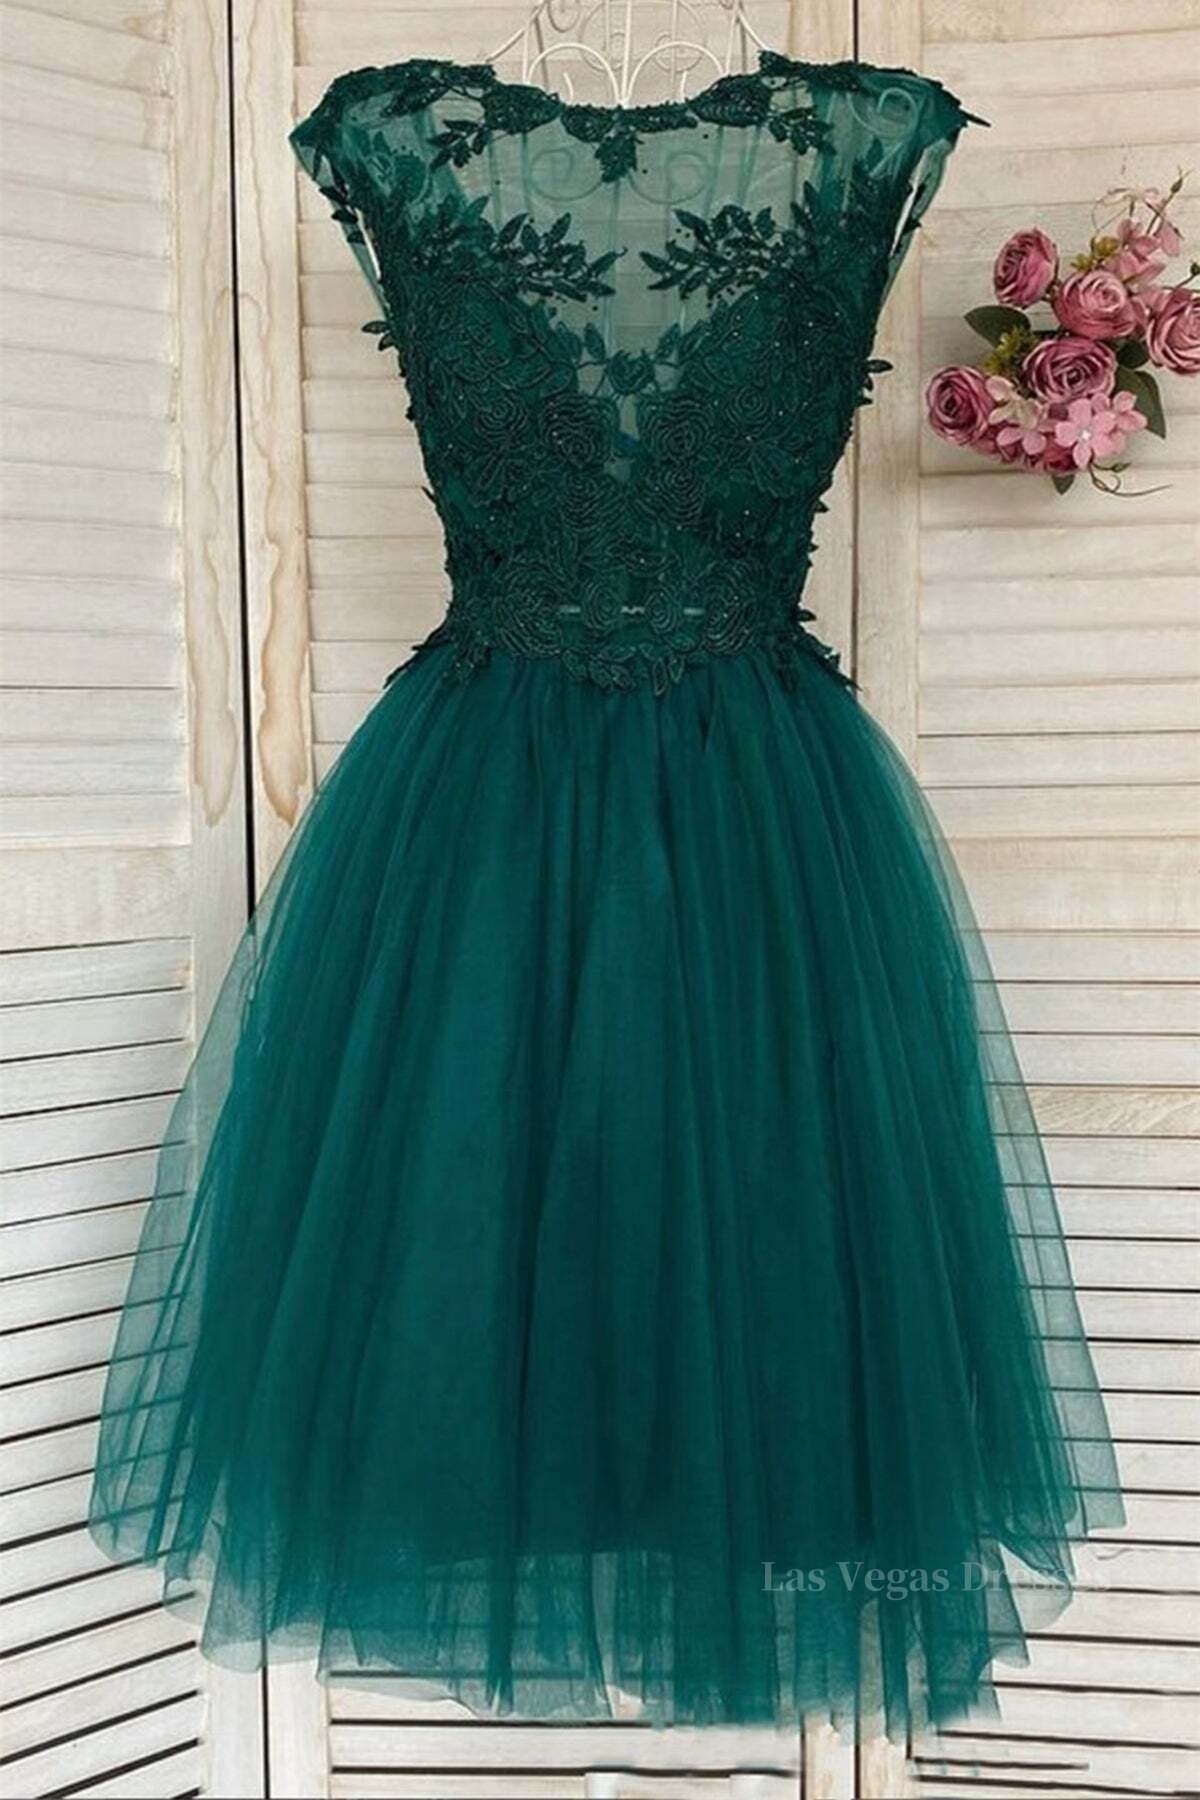 Round Neck Beaded Green Lace Short Prom Homecoming Dress, Short Green Lace Formal Graduation Evening Dress